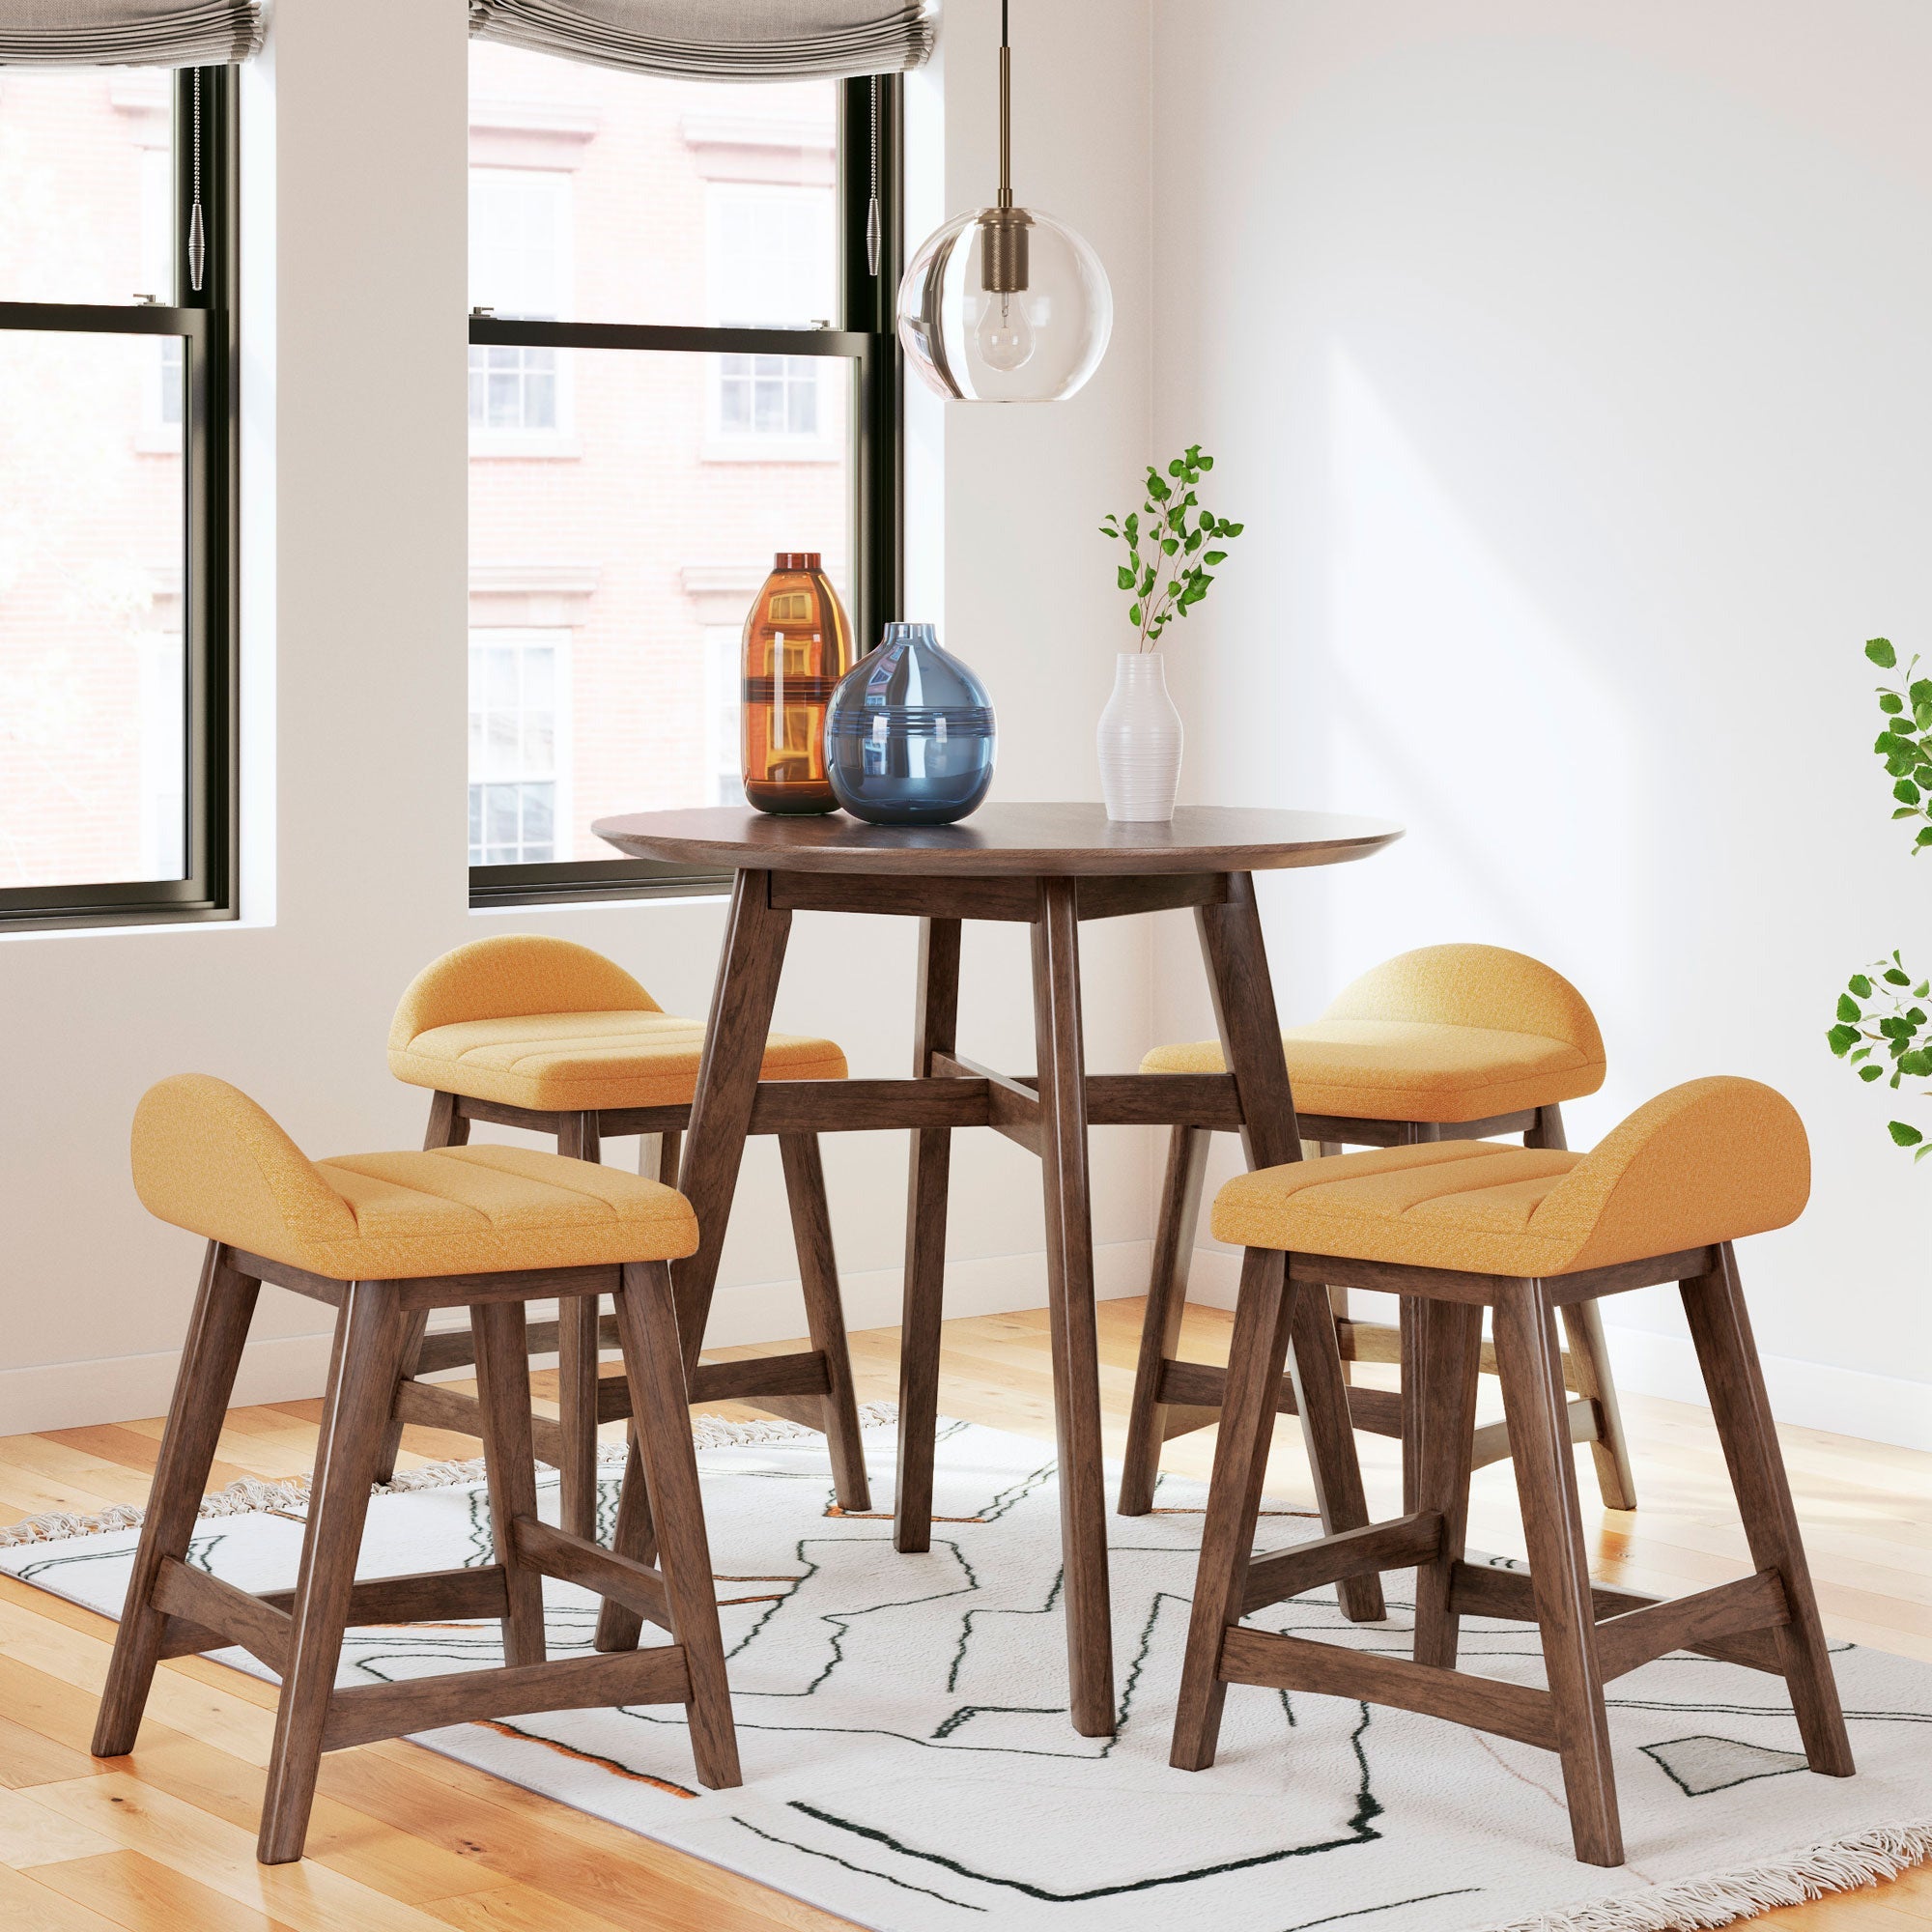 Lyncott Counter Height Dining Set (Mustard) - Round counter height table in a medium brown finish with 4 counter height upholstered mustard stools featuring a matching medium brown finish on the wood legs.